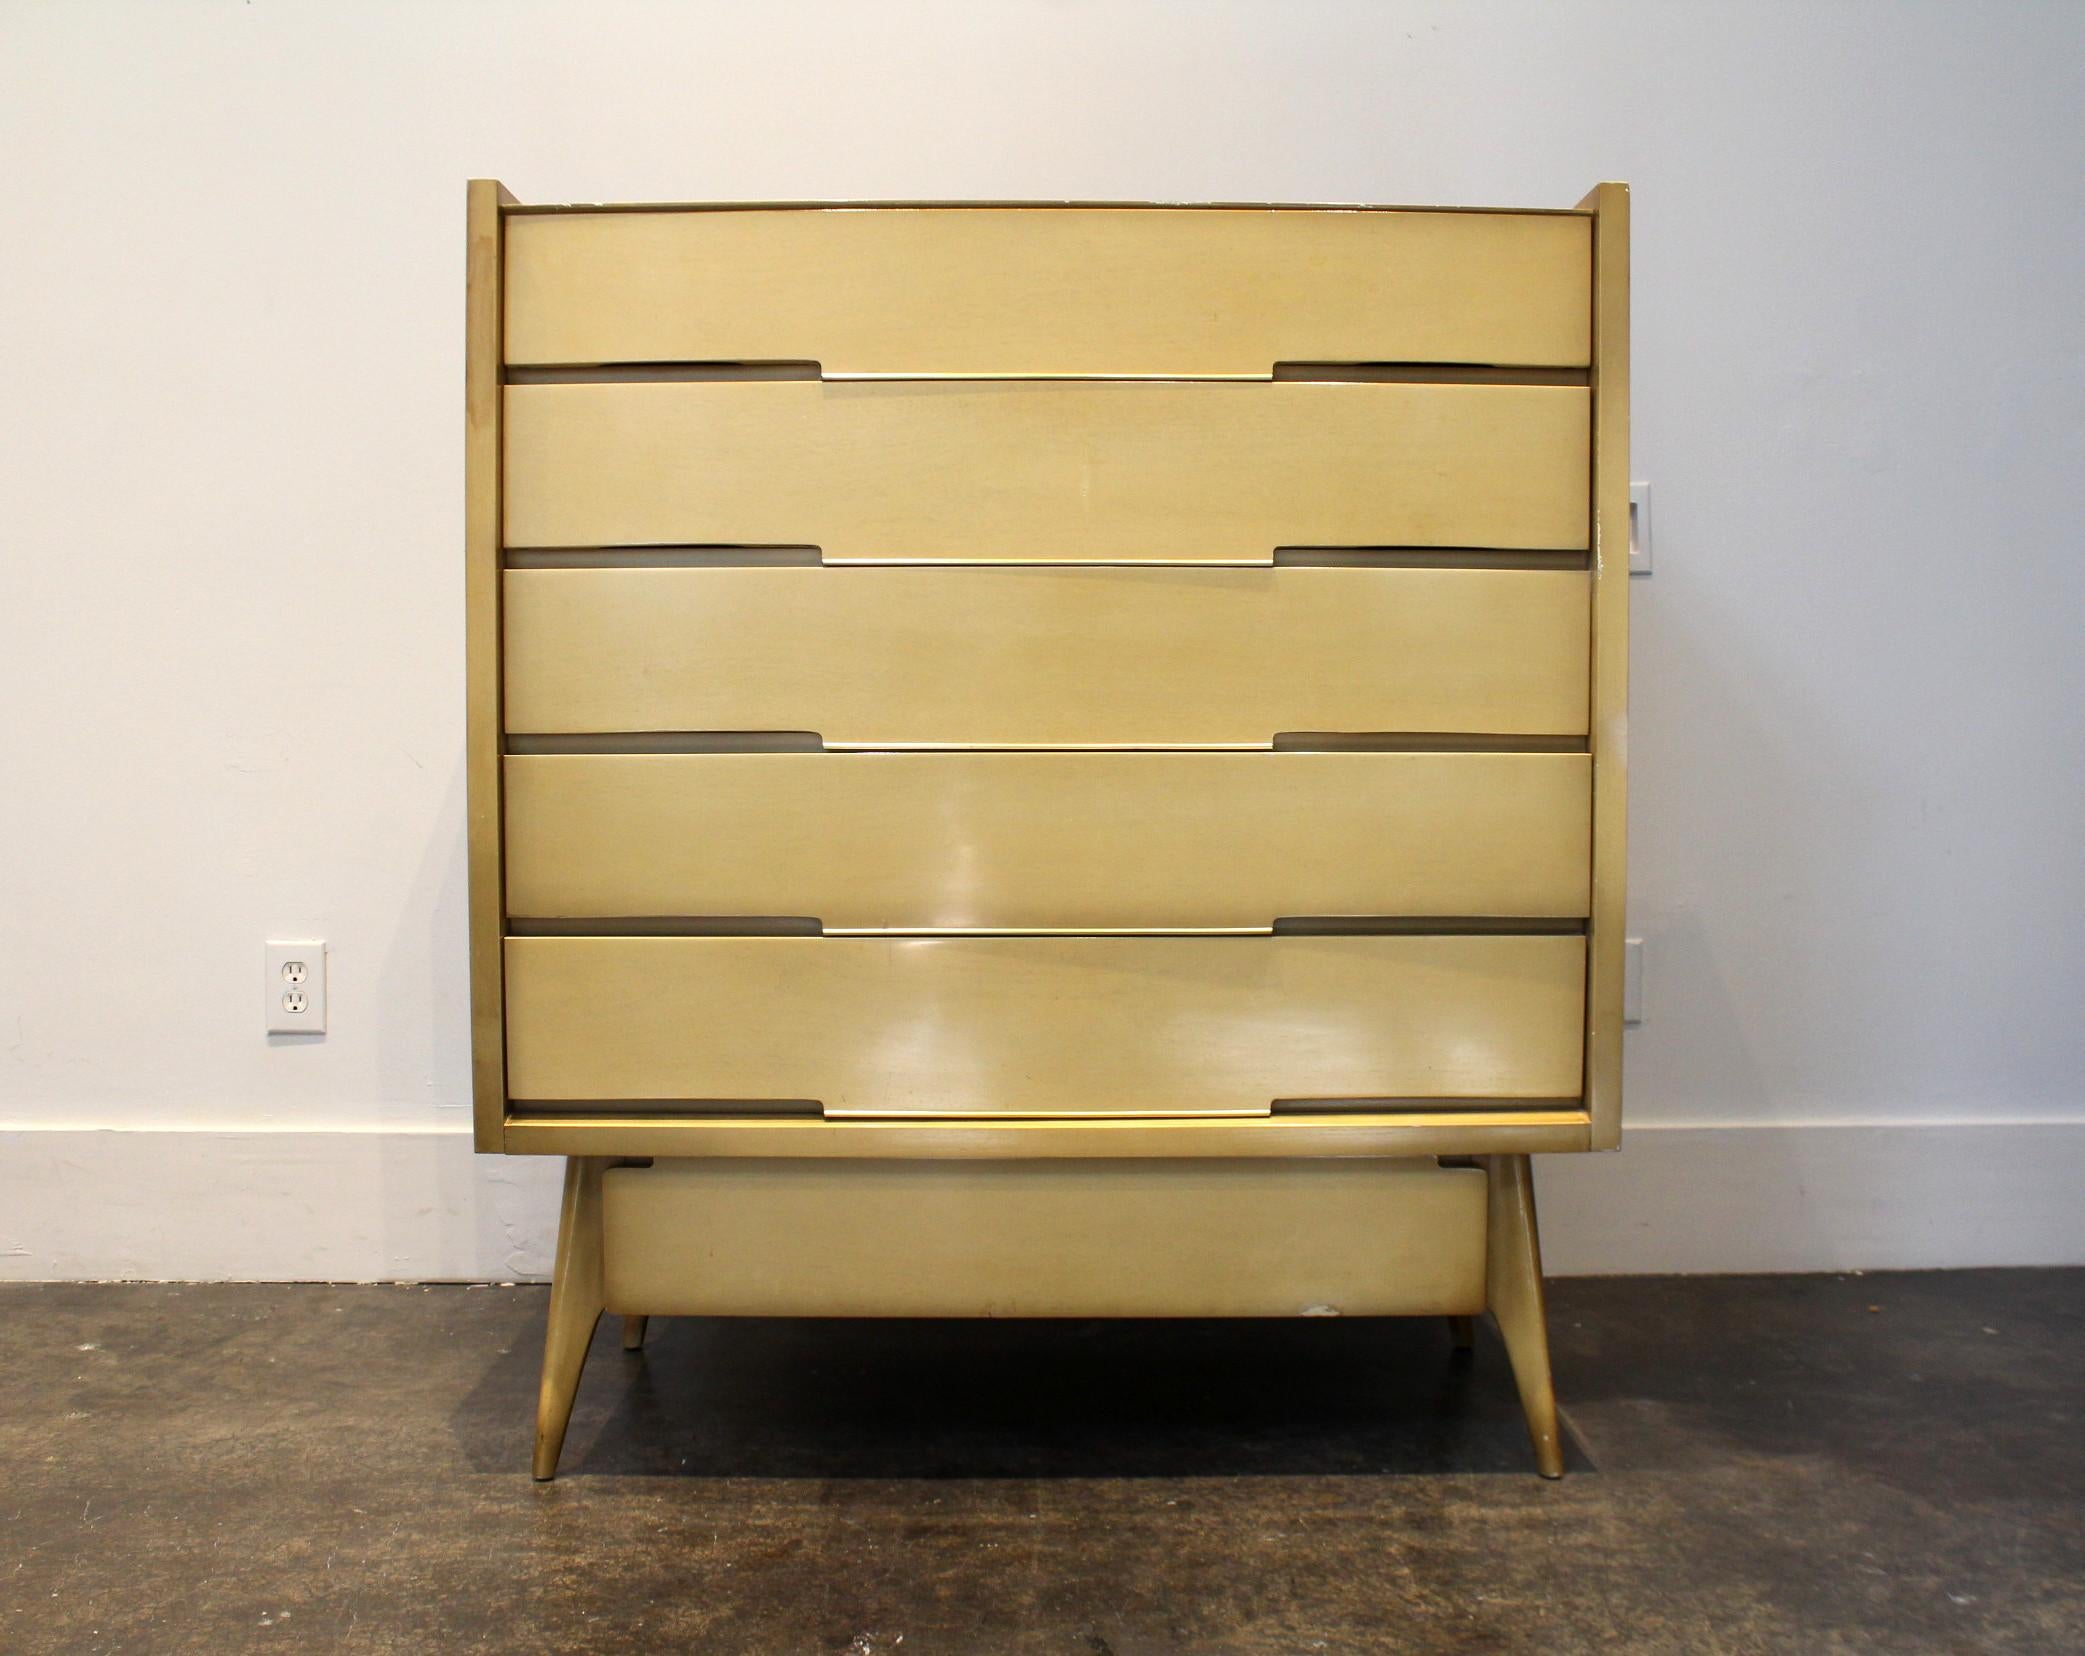 Large sculptural high chest in maple-colored wood with gold tones on the edges. Six total drawers, each with thin brass pulls. Piece is from 1963, has a worn out label on back for 